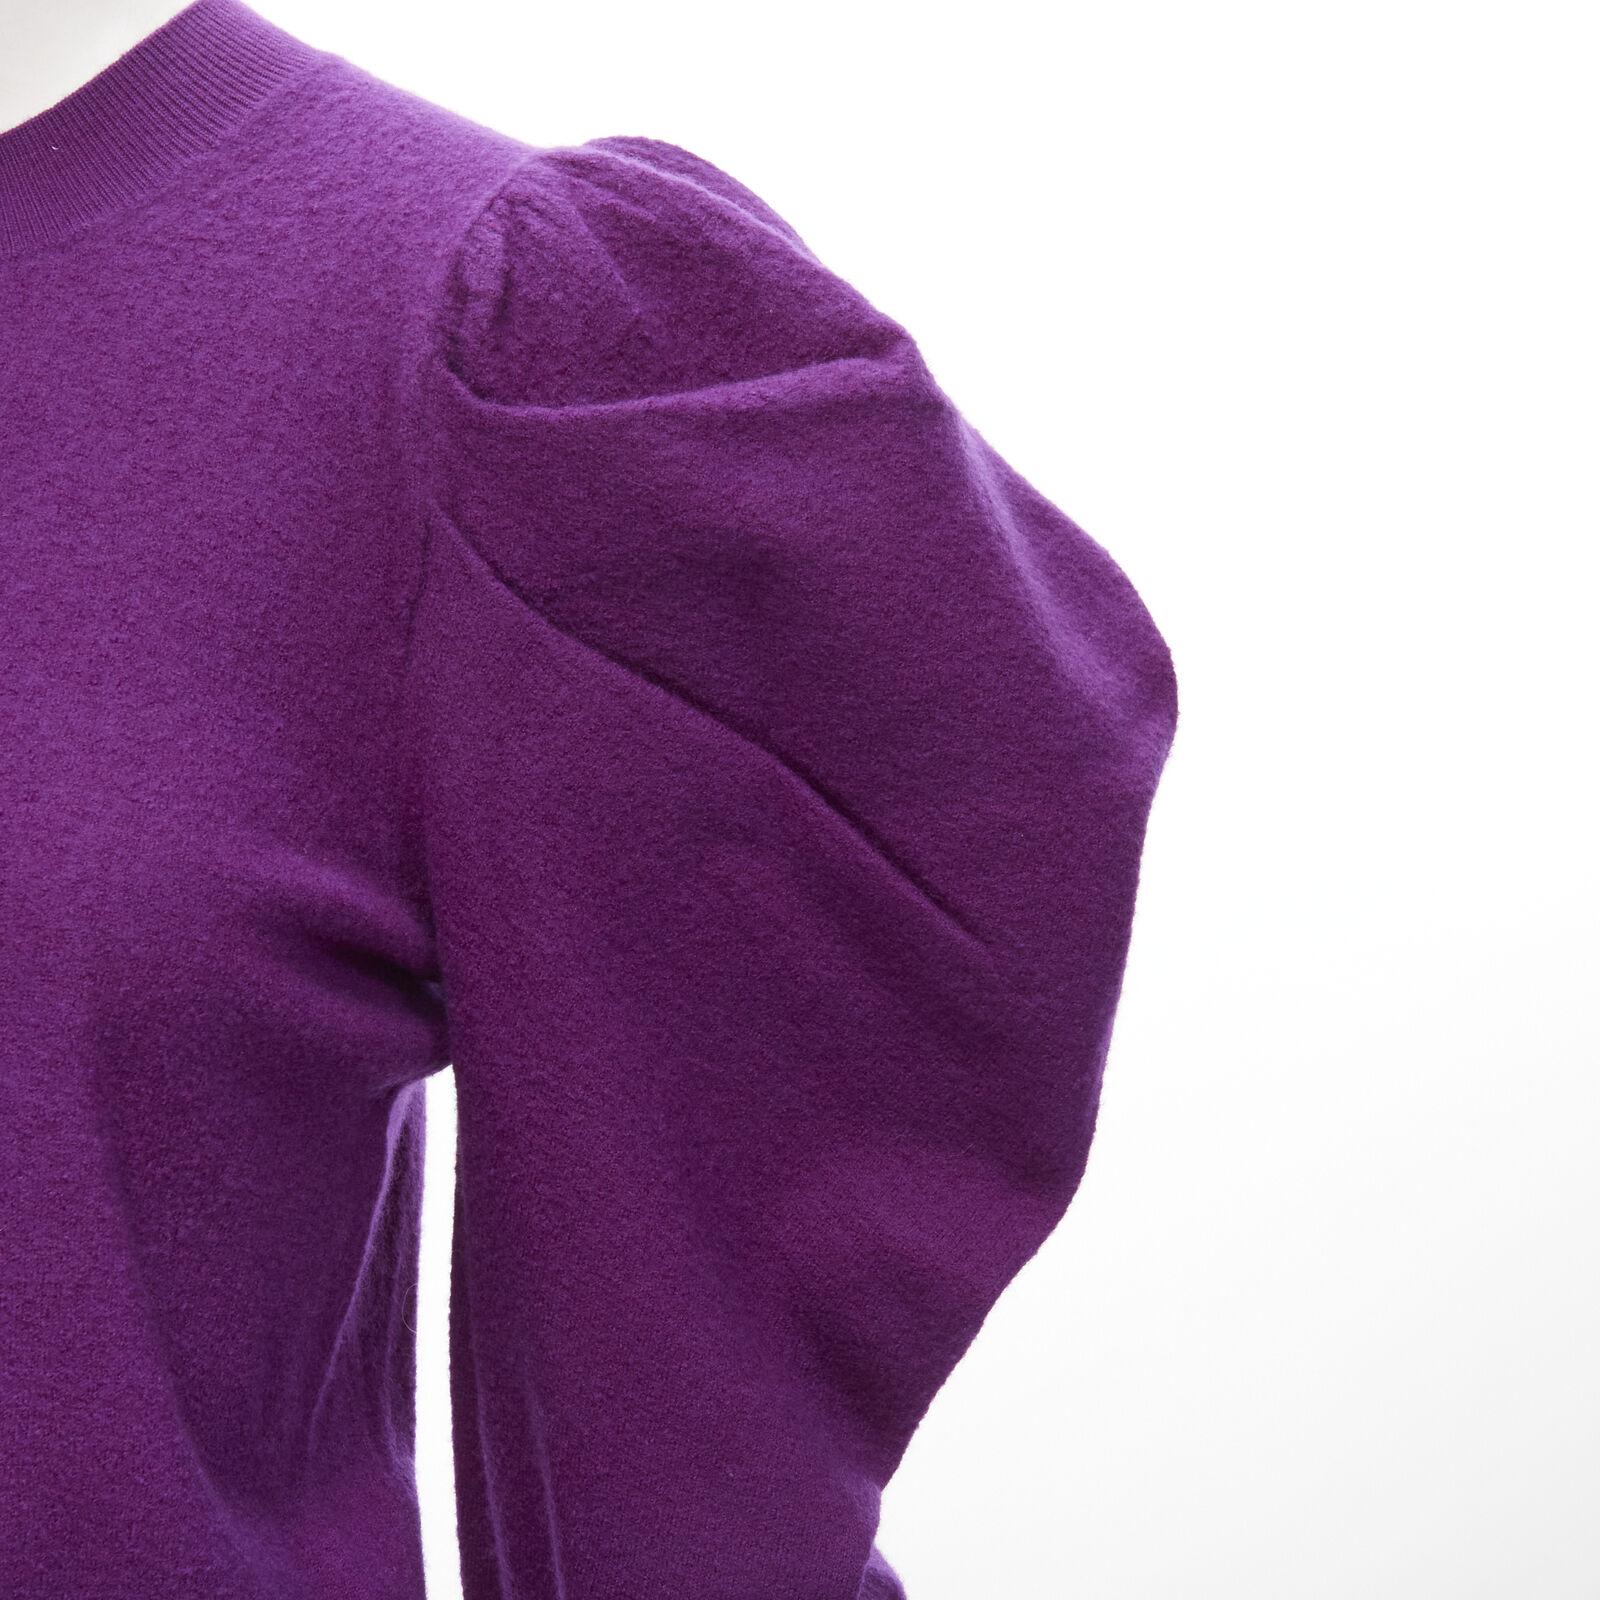 ULLA JOHNSON 100% merino wool purple Victorian puff sleeves sweater XS
Reference: AAWC/A00415
Brand: Ulla Johnson
Material: Merino Wool
Color: Purple
Pattern: Solid
Closure: Pullover
Made in: China

CONDITION:
Condition: Excellent, this item was